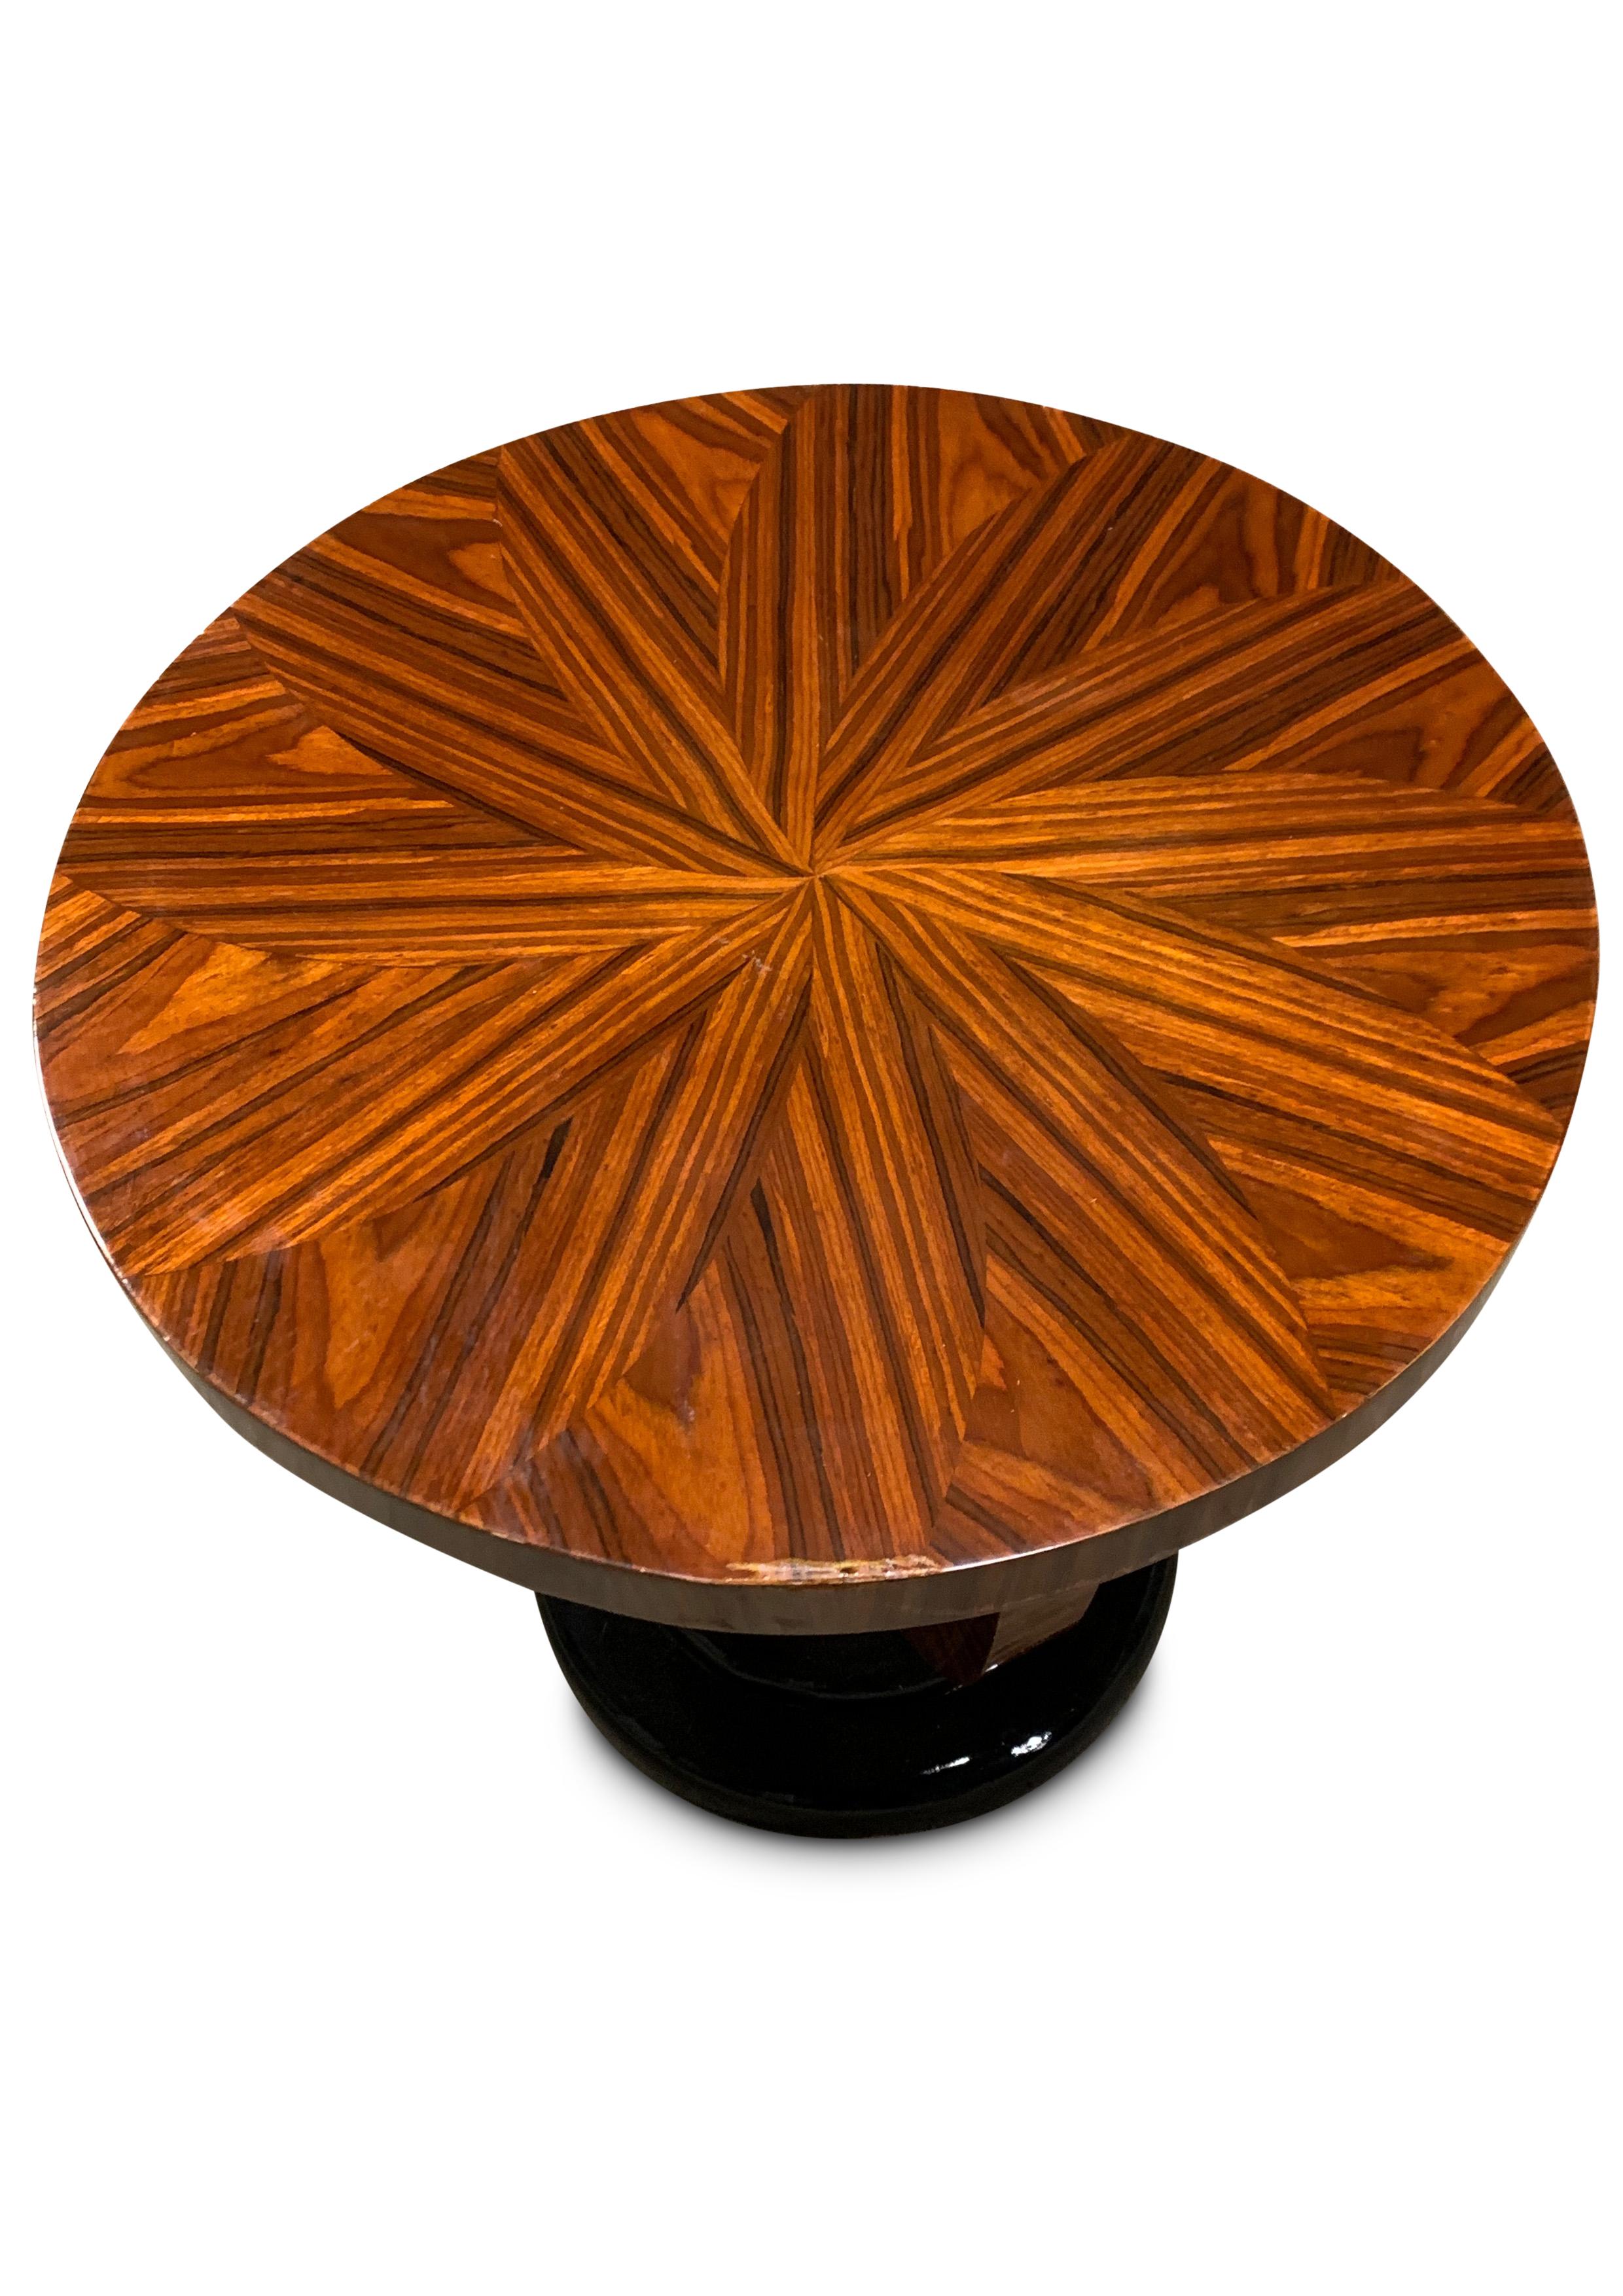 French Jules Leleu Style Art Deco Pedestal Table With A Beautiful Rosewood Sunburst Top For Sale